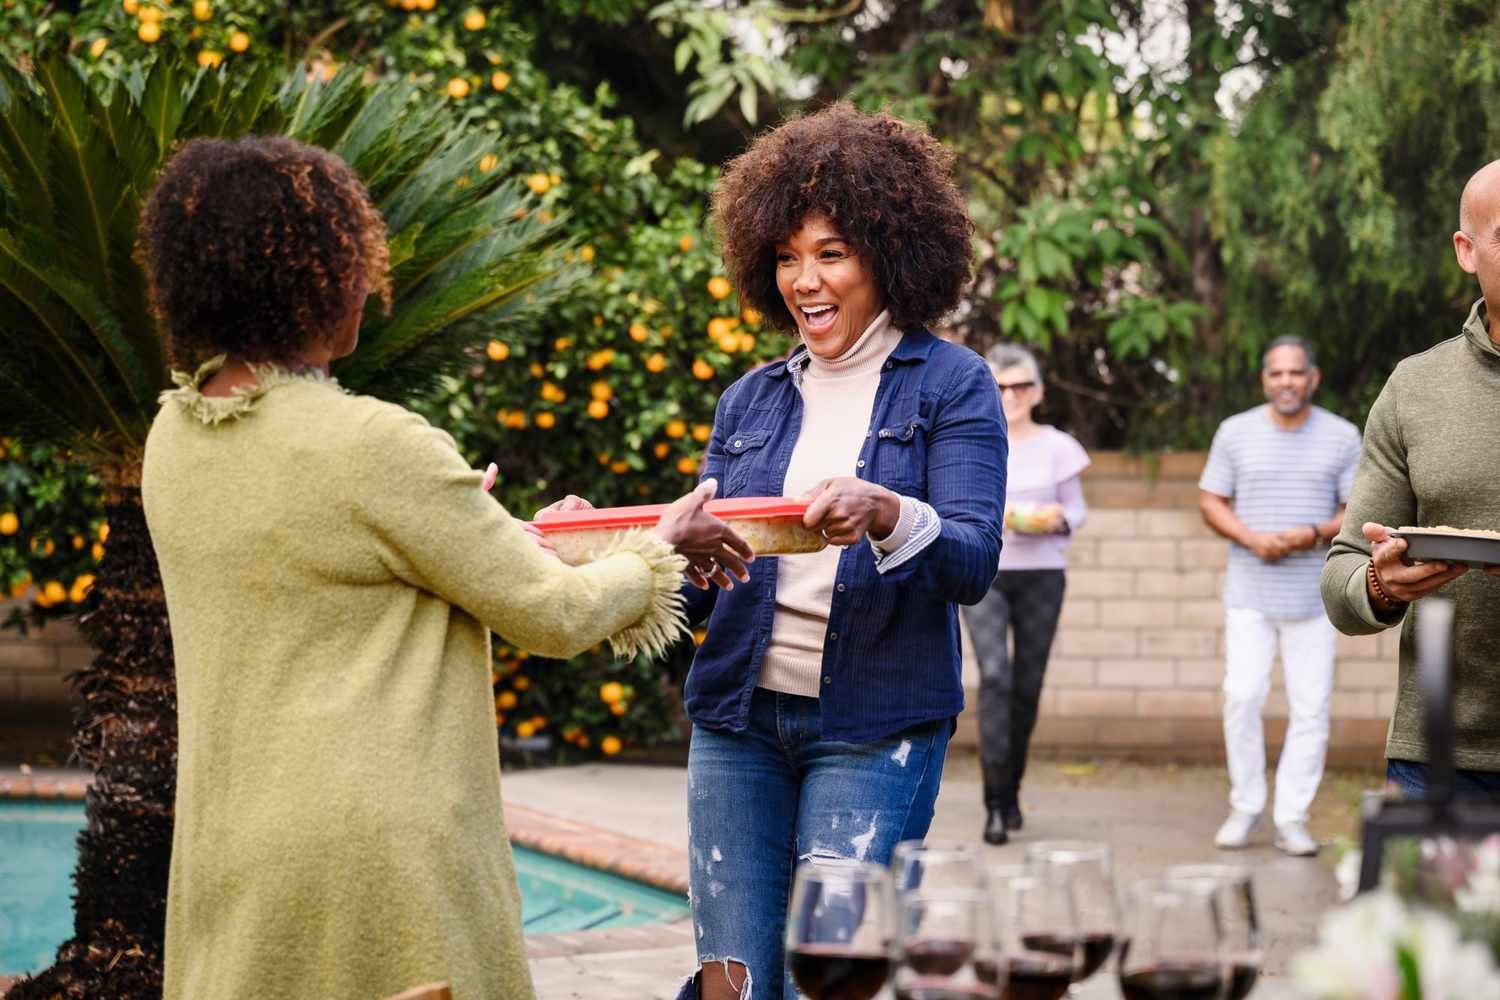 How to Organize a Successful Potluck, According to Chefs and Entertaining Experts